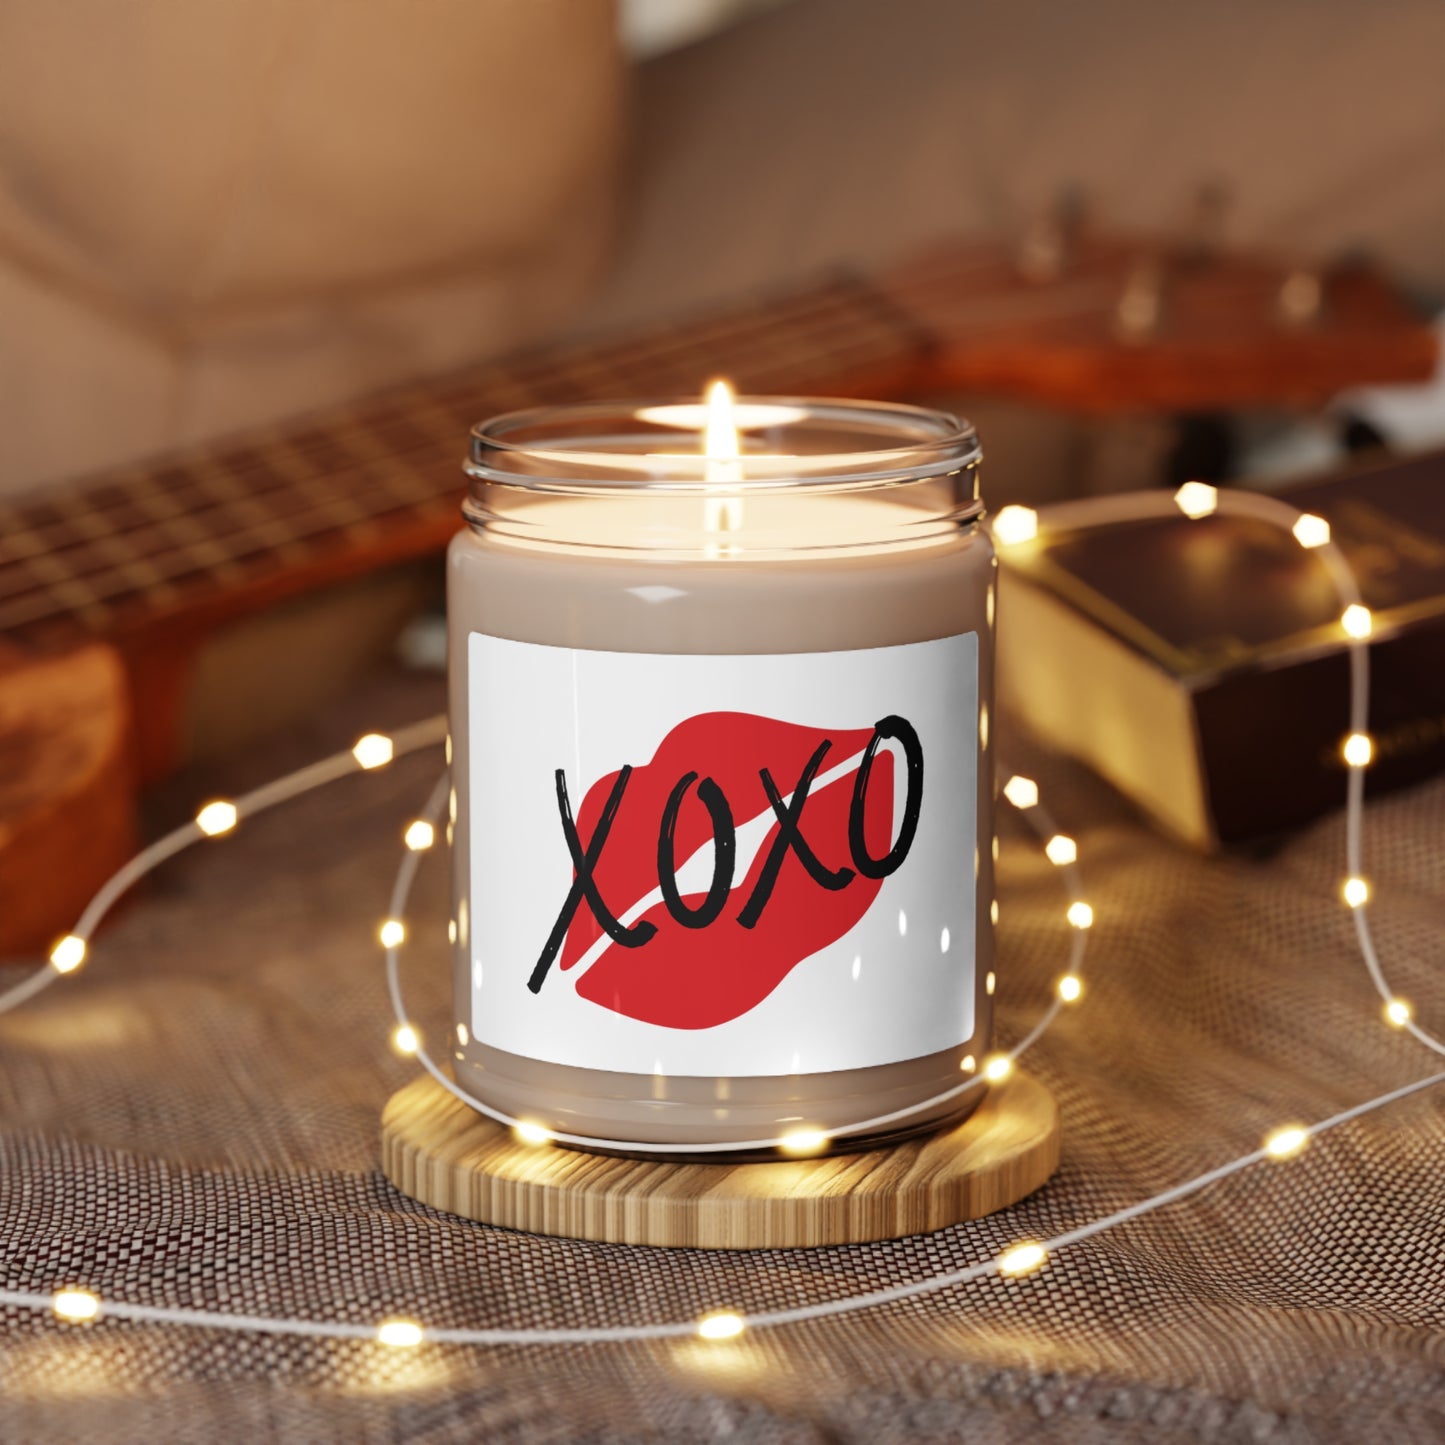 XOXO Kiss Valentines Day Themed Apple Harvest Scented Soy Candle, 9oz